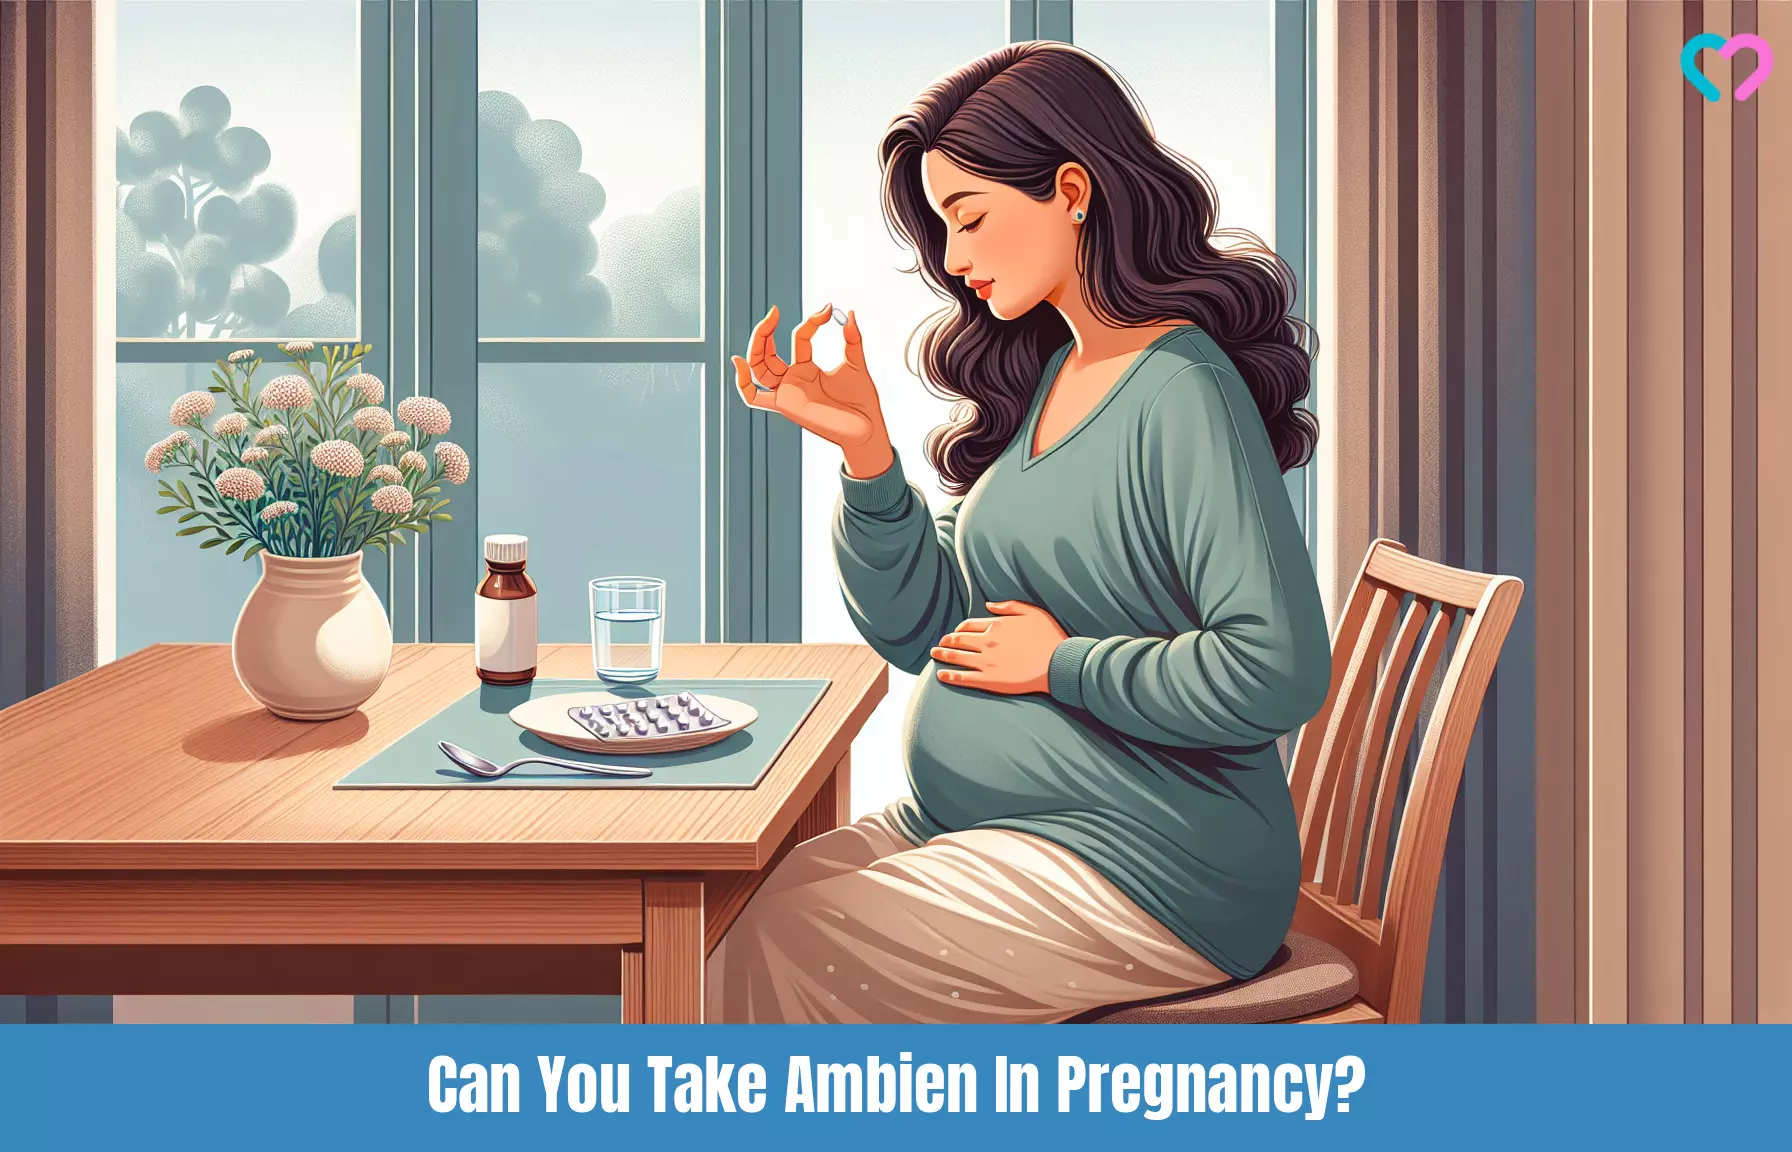 Can You Take Ambien While Pregnant_illustration